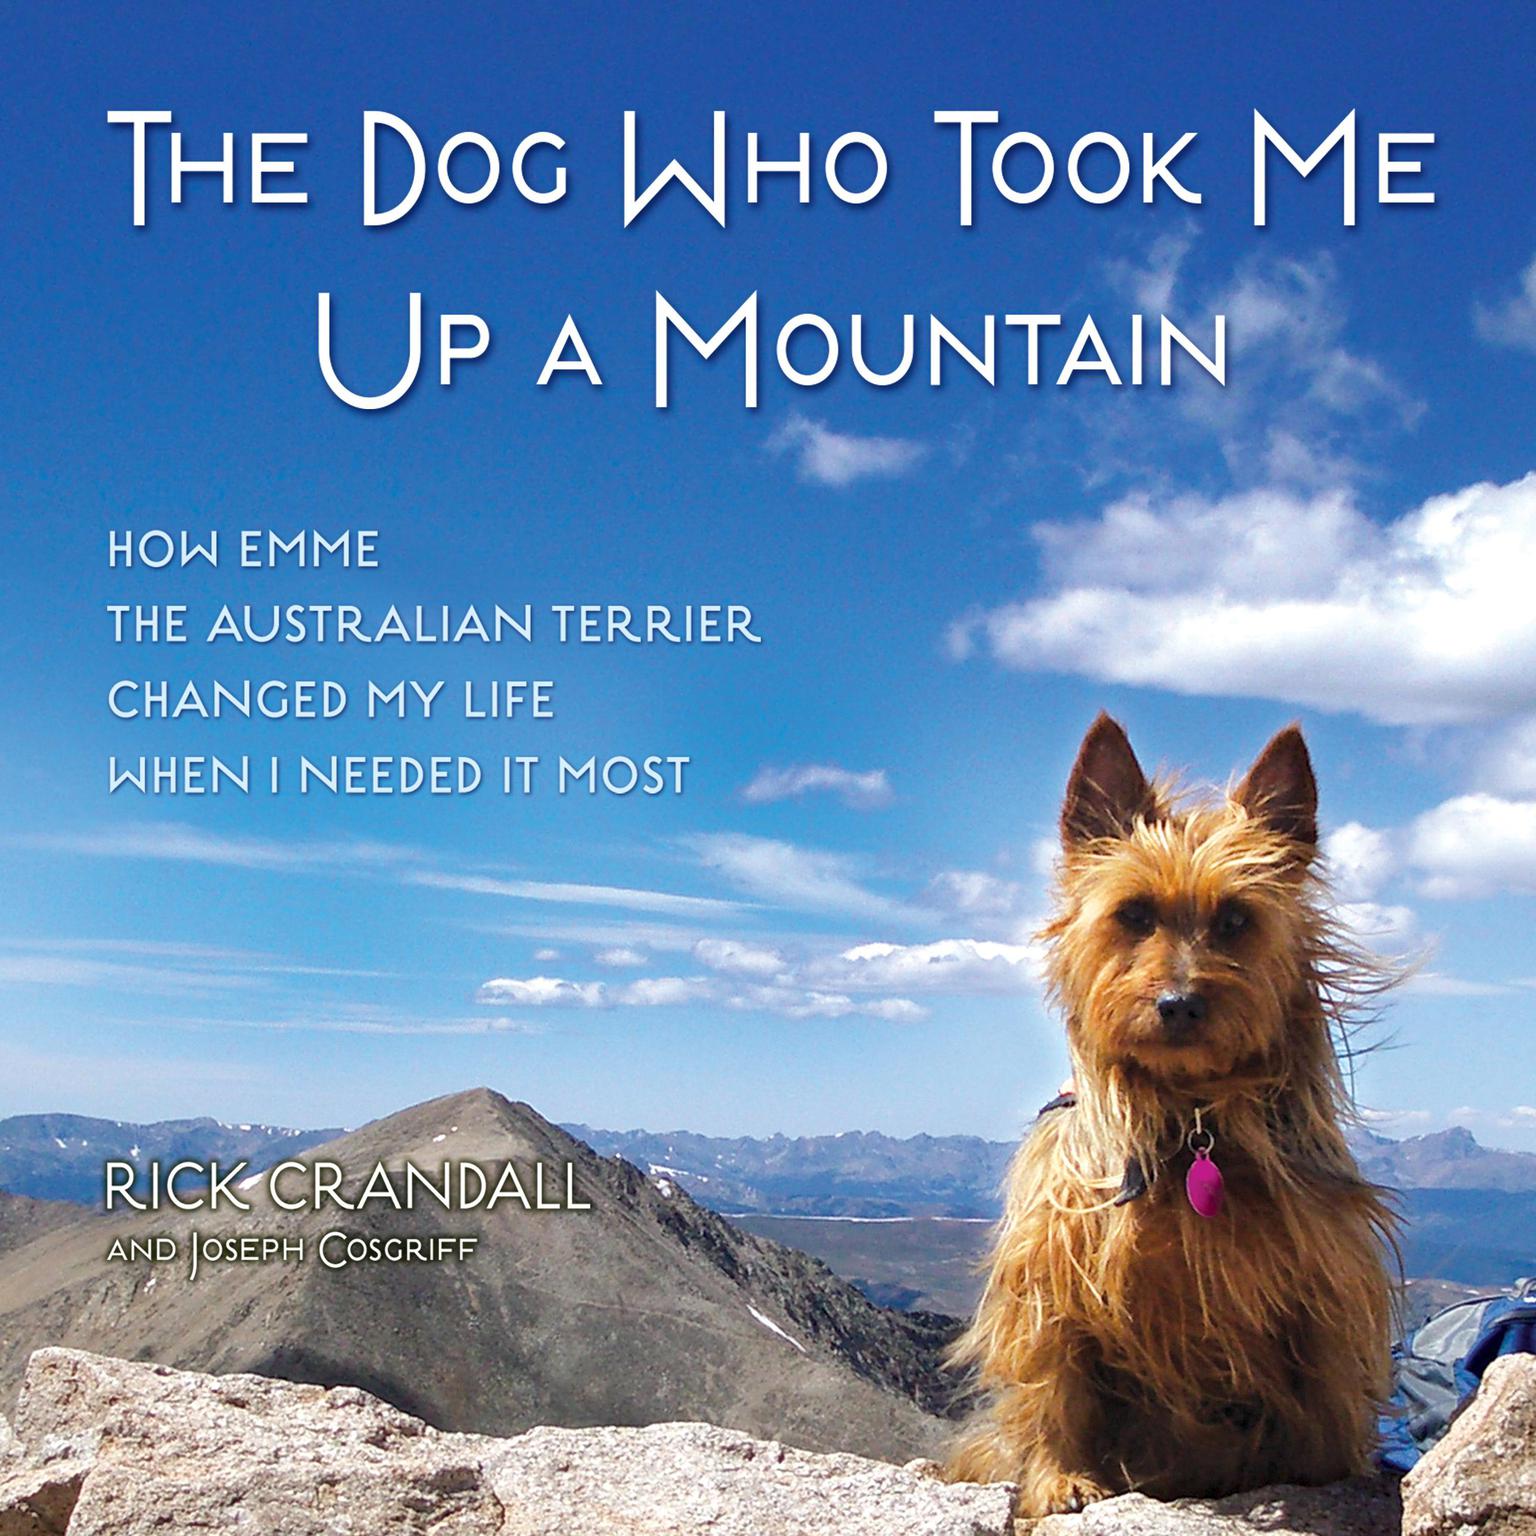 The Dog Who Took Me Up a Mountain: How Emme The Australian Terrier Changed My Life When I Needed It Most Audiobook, by Rick Crandall